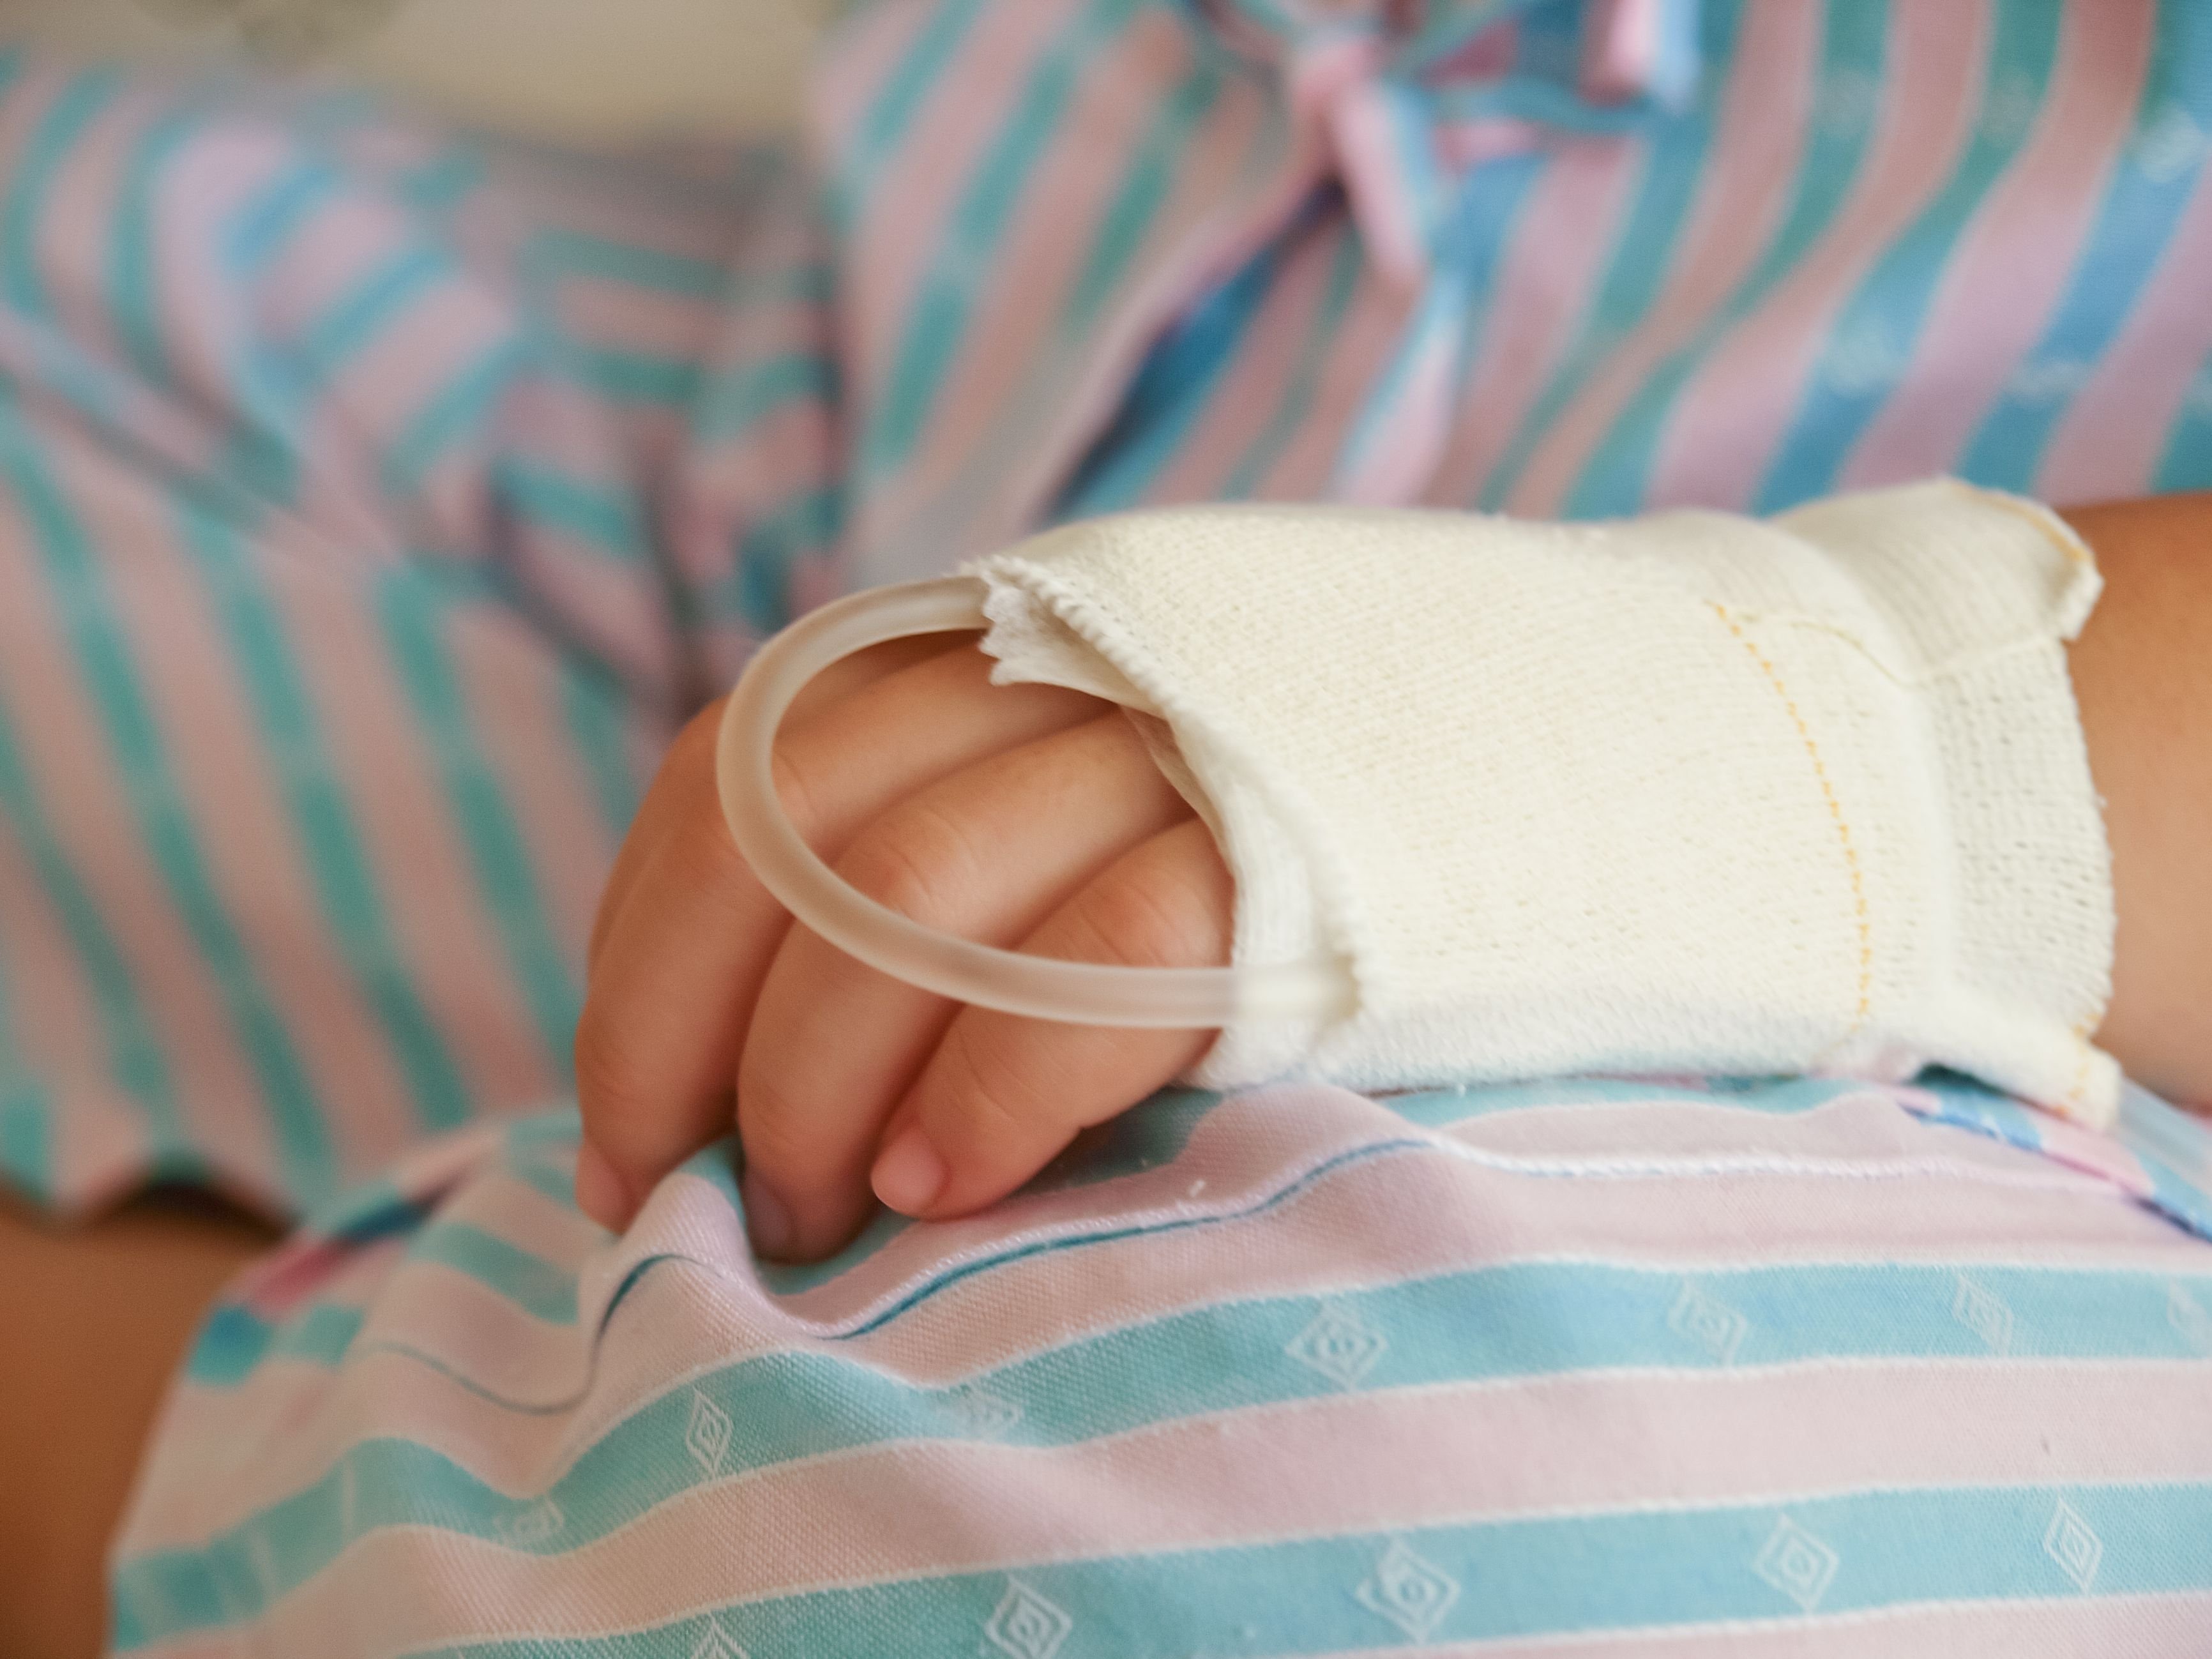 A baby's hand with a dextrose. | Source: Shutterstock